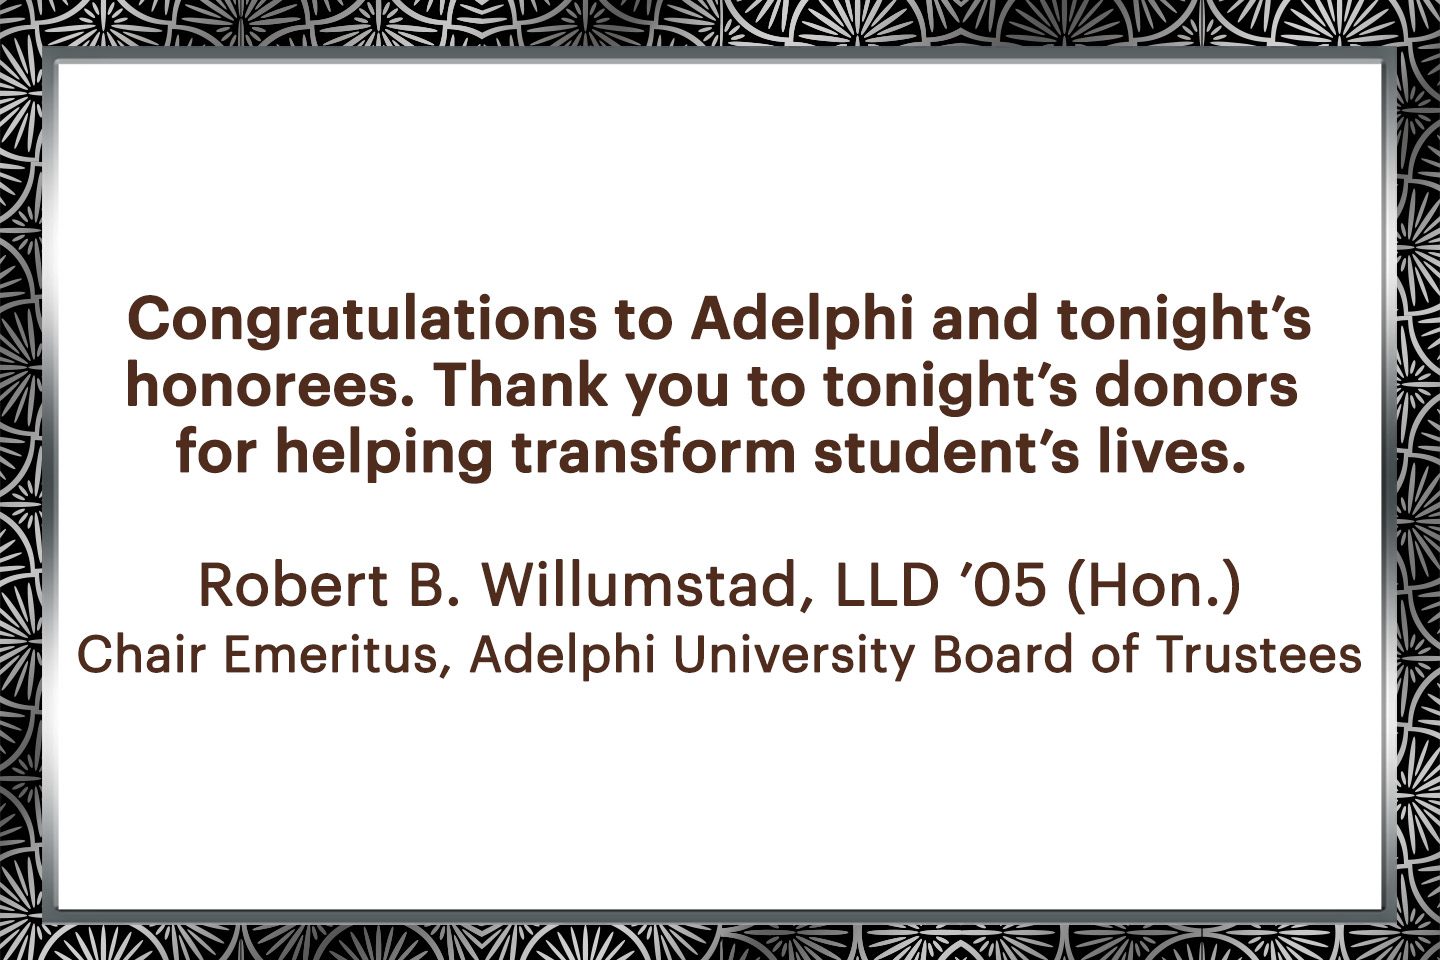 Congratulation to Adelphi and tonight's honorees. Thank you to tonight's donors for helping transform student's lives. - Robert B. Willumstad, LLD '05 (Hon.)